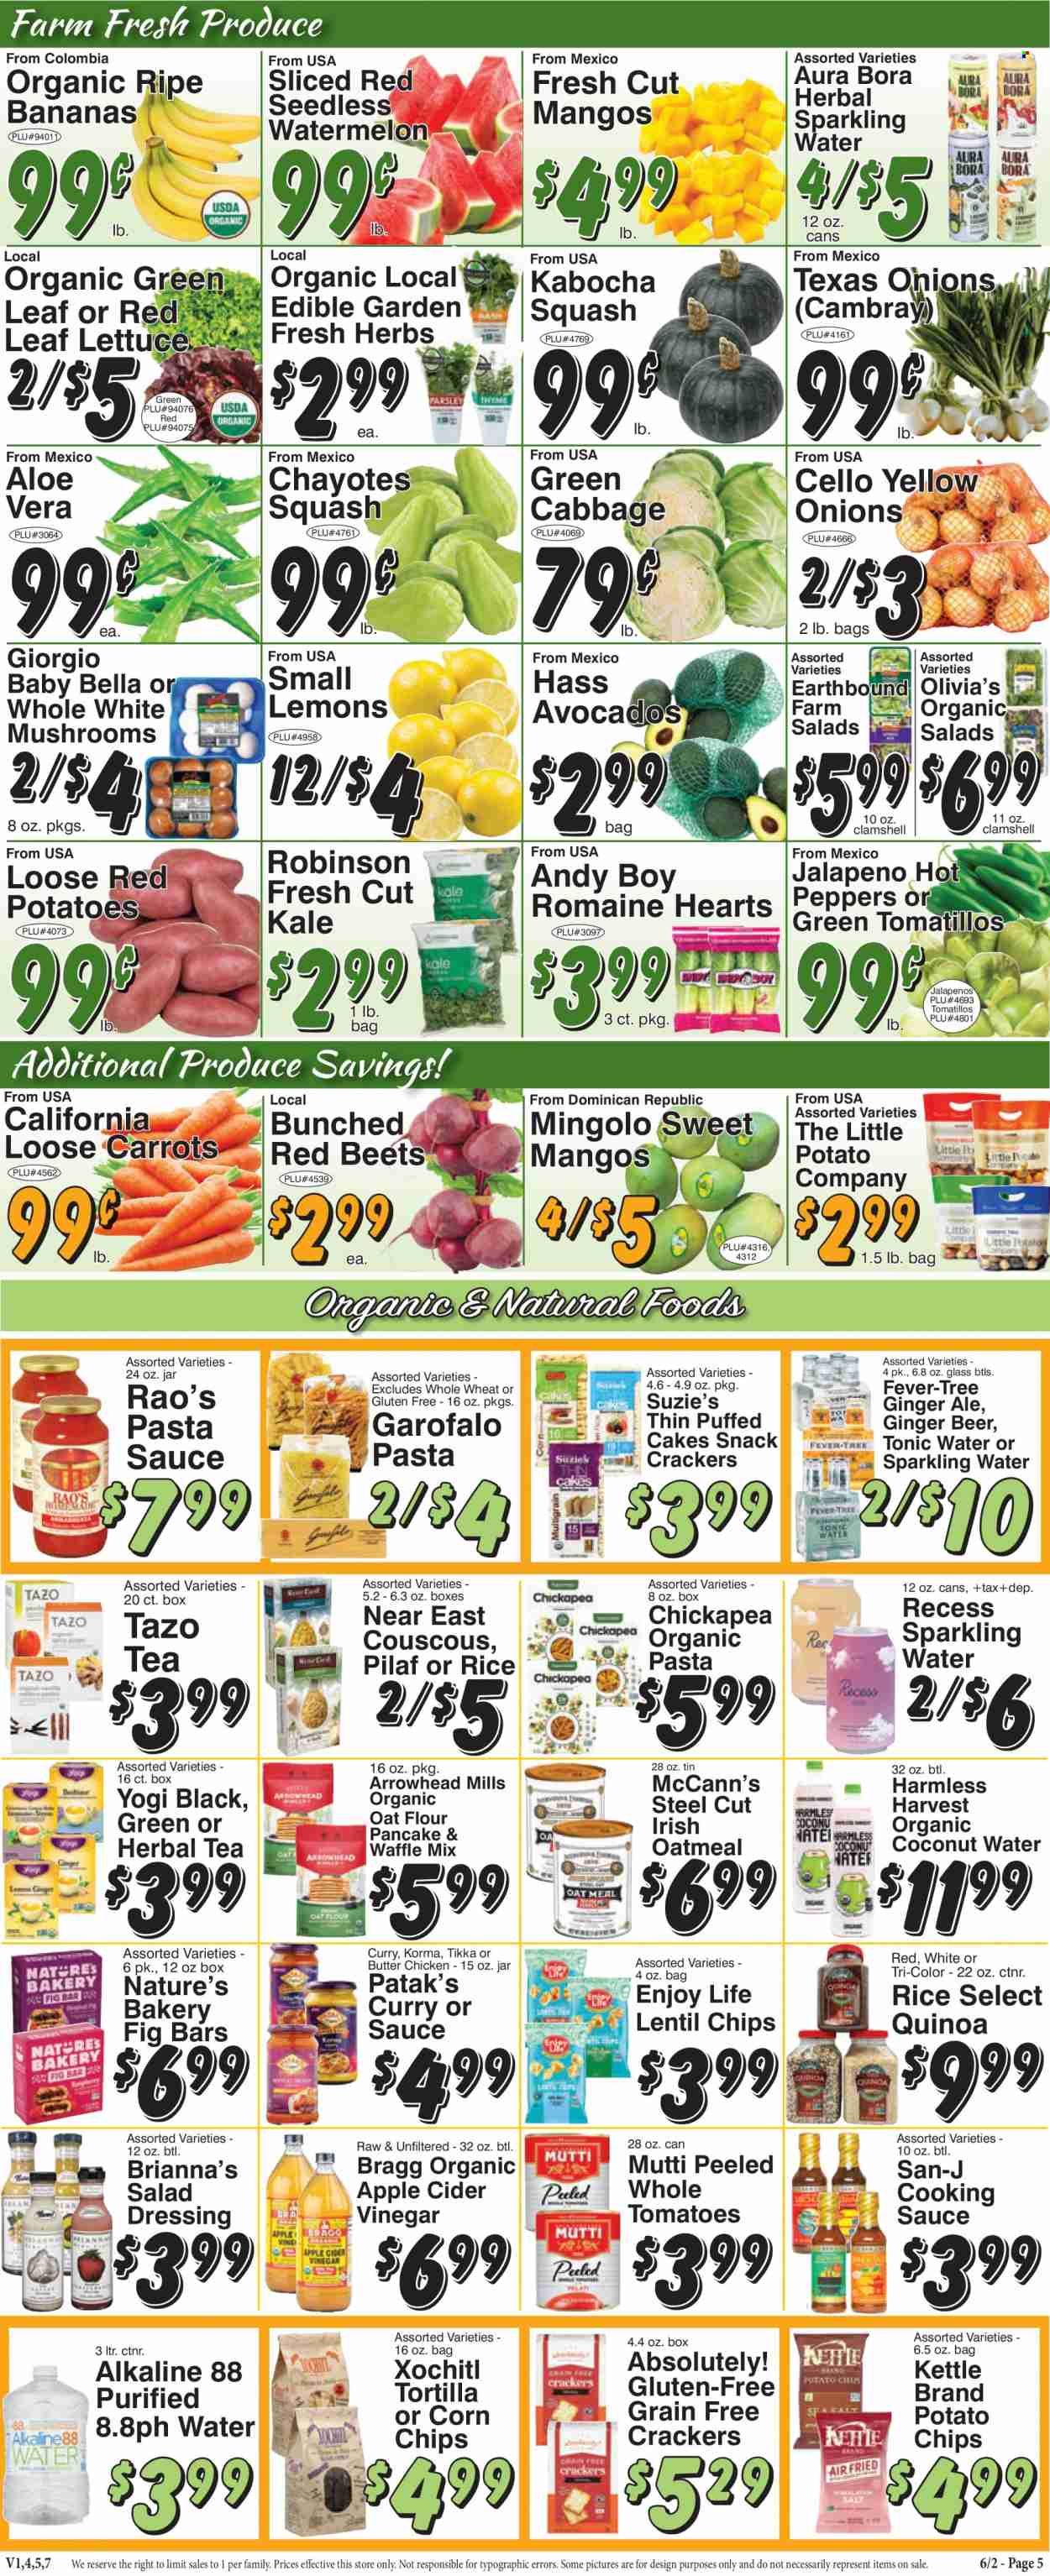 thumbnail - Trade Fair Supermarket Flyer - 06/02/2023 - 06/08/2023 - Sales products - mushrooms, tortillas, cabbage, carrots, tomatillo, tomatoes, kale, pumpkin, onion, peppers, jalapeño, red potatoes, avocado, bananas, mango, watermelon, chayote, pasta sauce, pancakes, snack, crackers, potato chips, chips, corn chips, oatmeal, couscous, quinoa, rice, salad dressing, dressing, apple cider vinegar, ginger ale, tonic, coconut water, sparkling water, aloe vera, tea, herbal tea, alcohol, beer, chicken, ginger beer, lemons. Page 5.